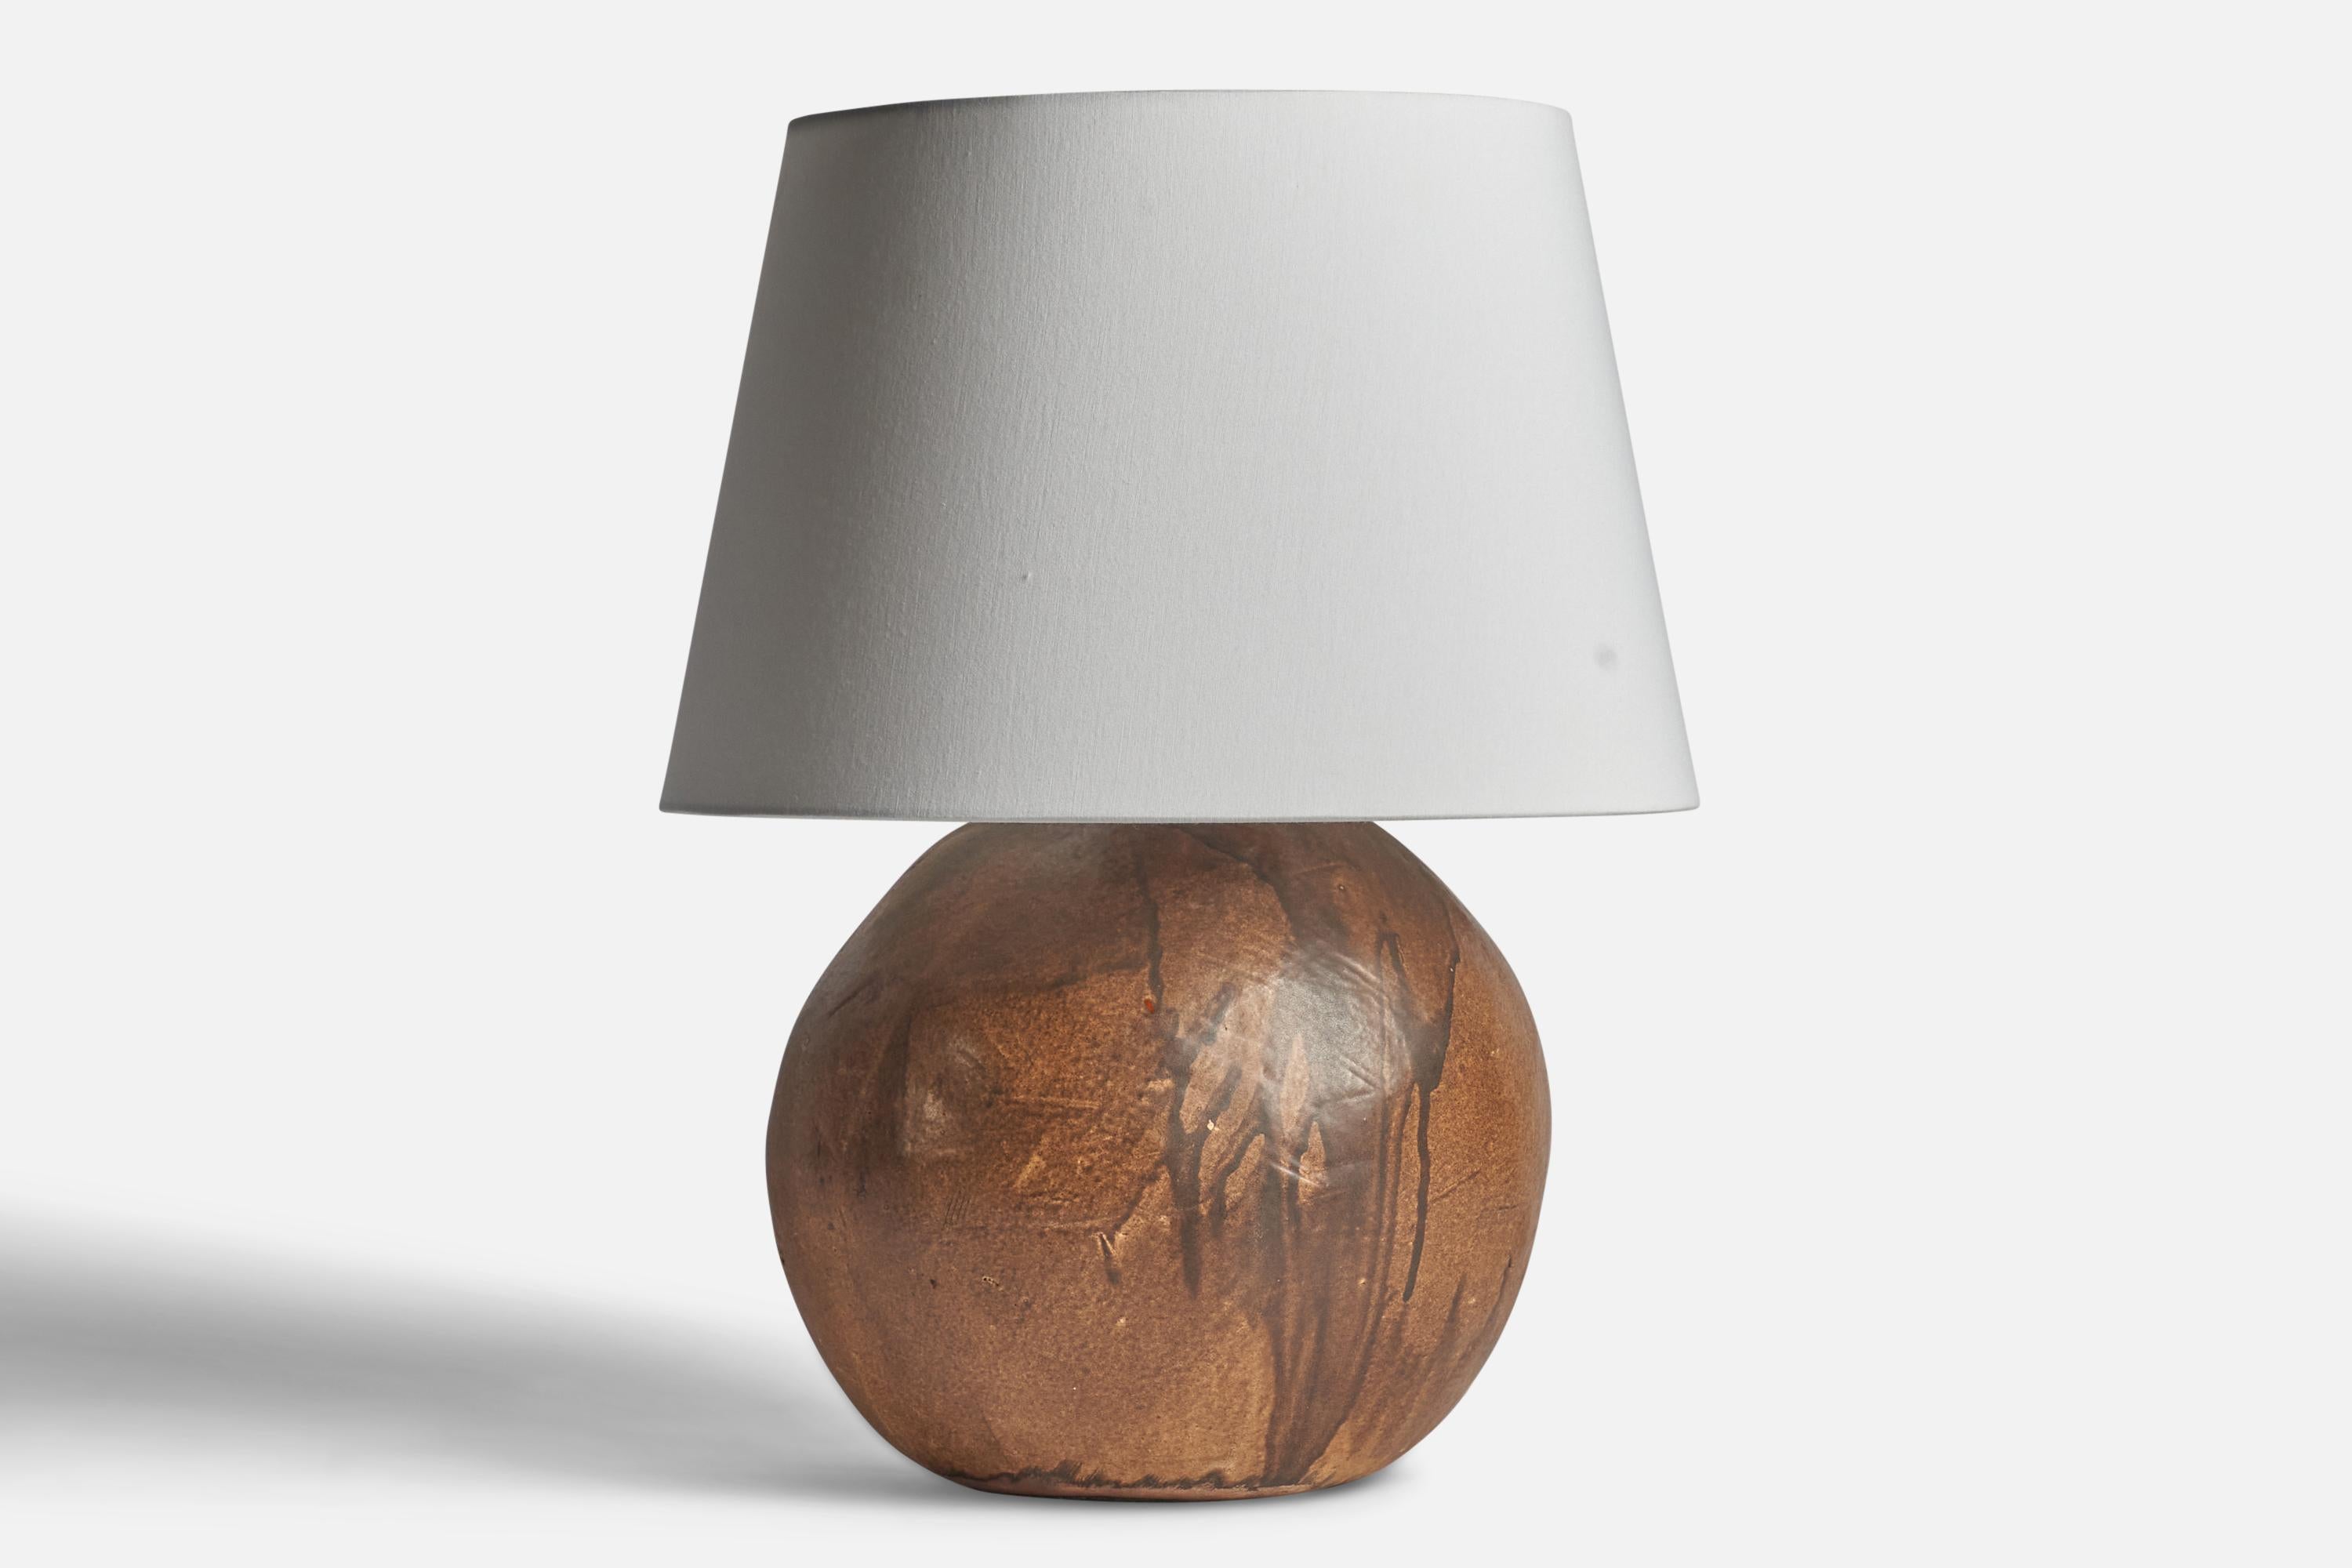 A large brown-glazed ceramic table lamp designed and produced in Denmark, c. 1960s.

Dimensions of Lamp (inches): 16.5” H x 12.5” Diameter
Dimensions of Shade (inches): 12” Top Diameter x 16” Bottom Diameter x 10.75” H
Dimensions of Lamp with Shade